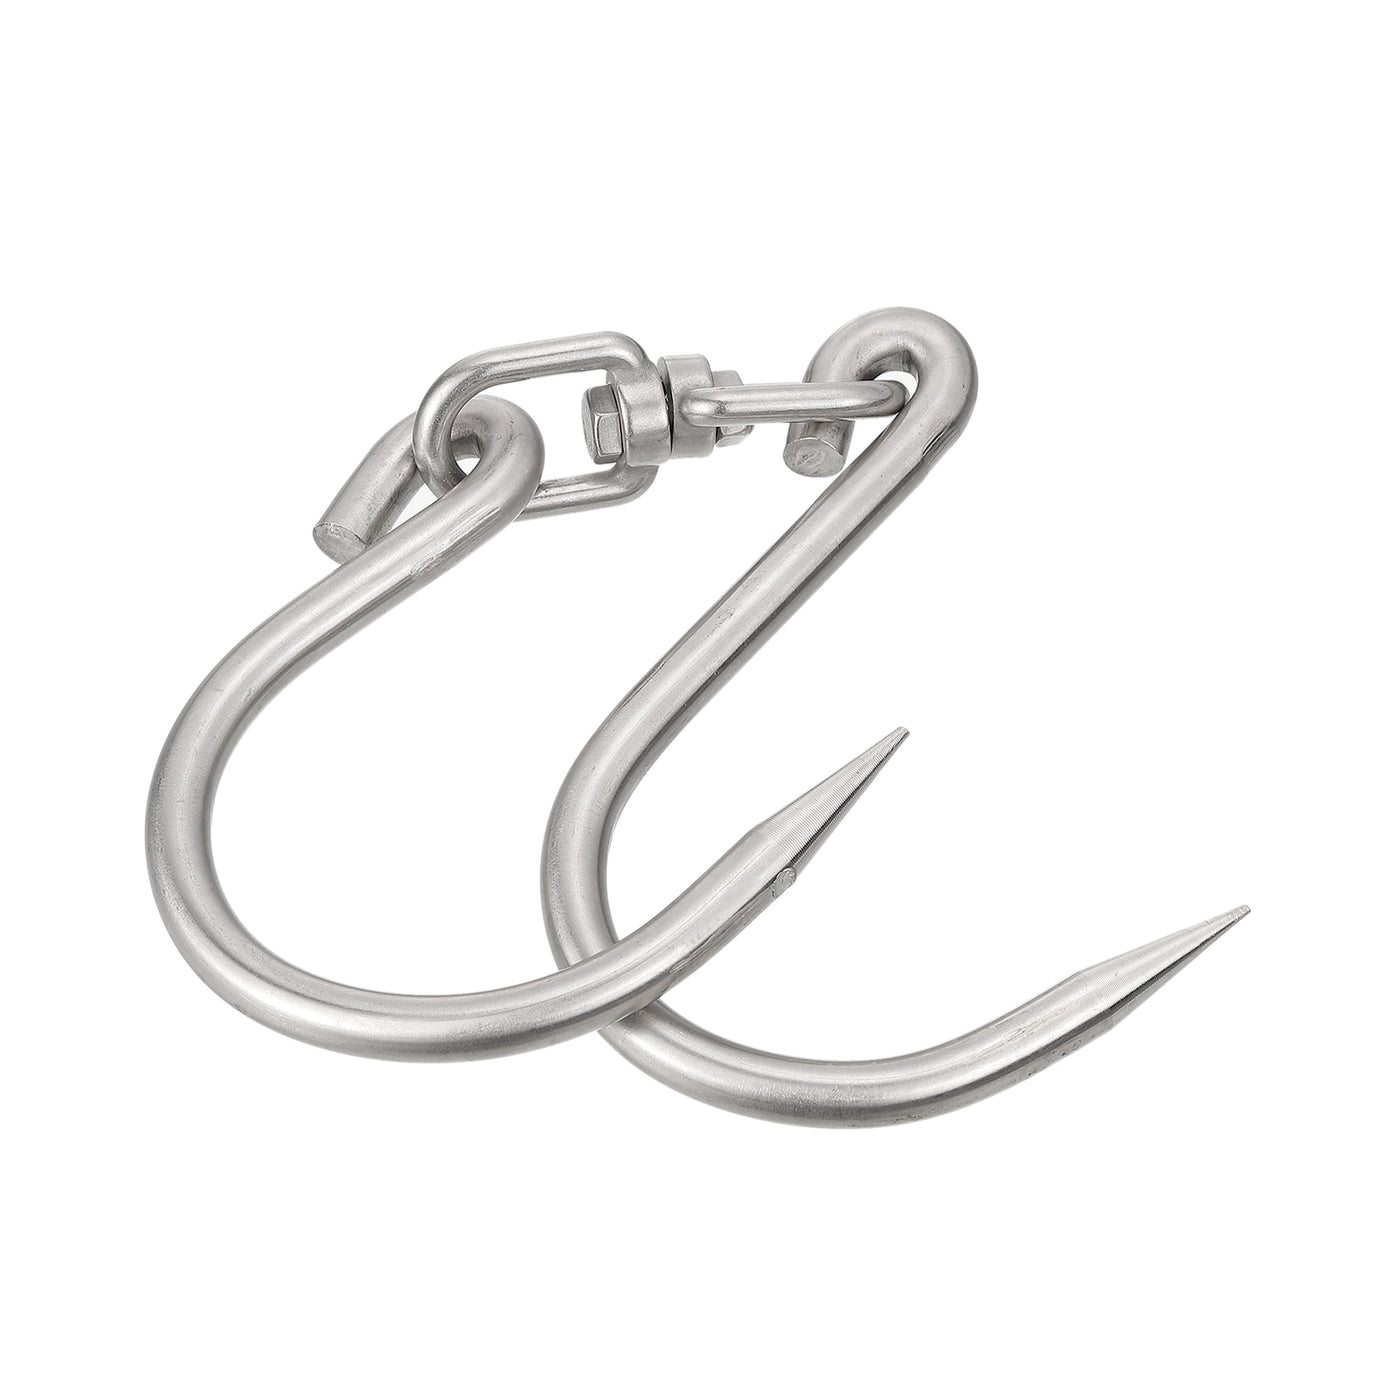 uxcell Uxcell 14.5'' Double Meat Hooks, 0.47'' Thickness Stainless Steel Swivel Meat Hook